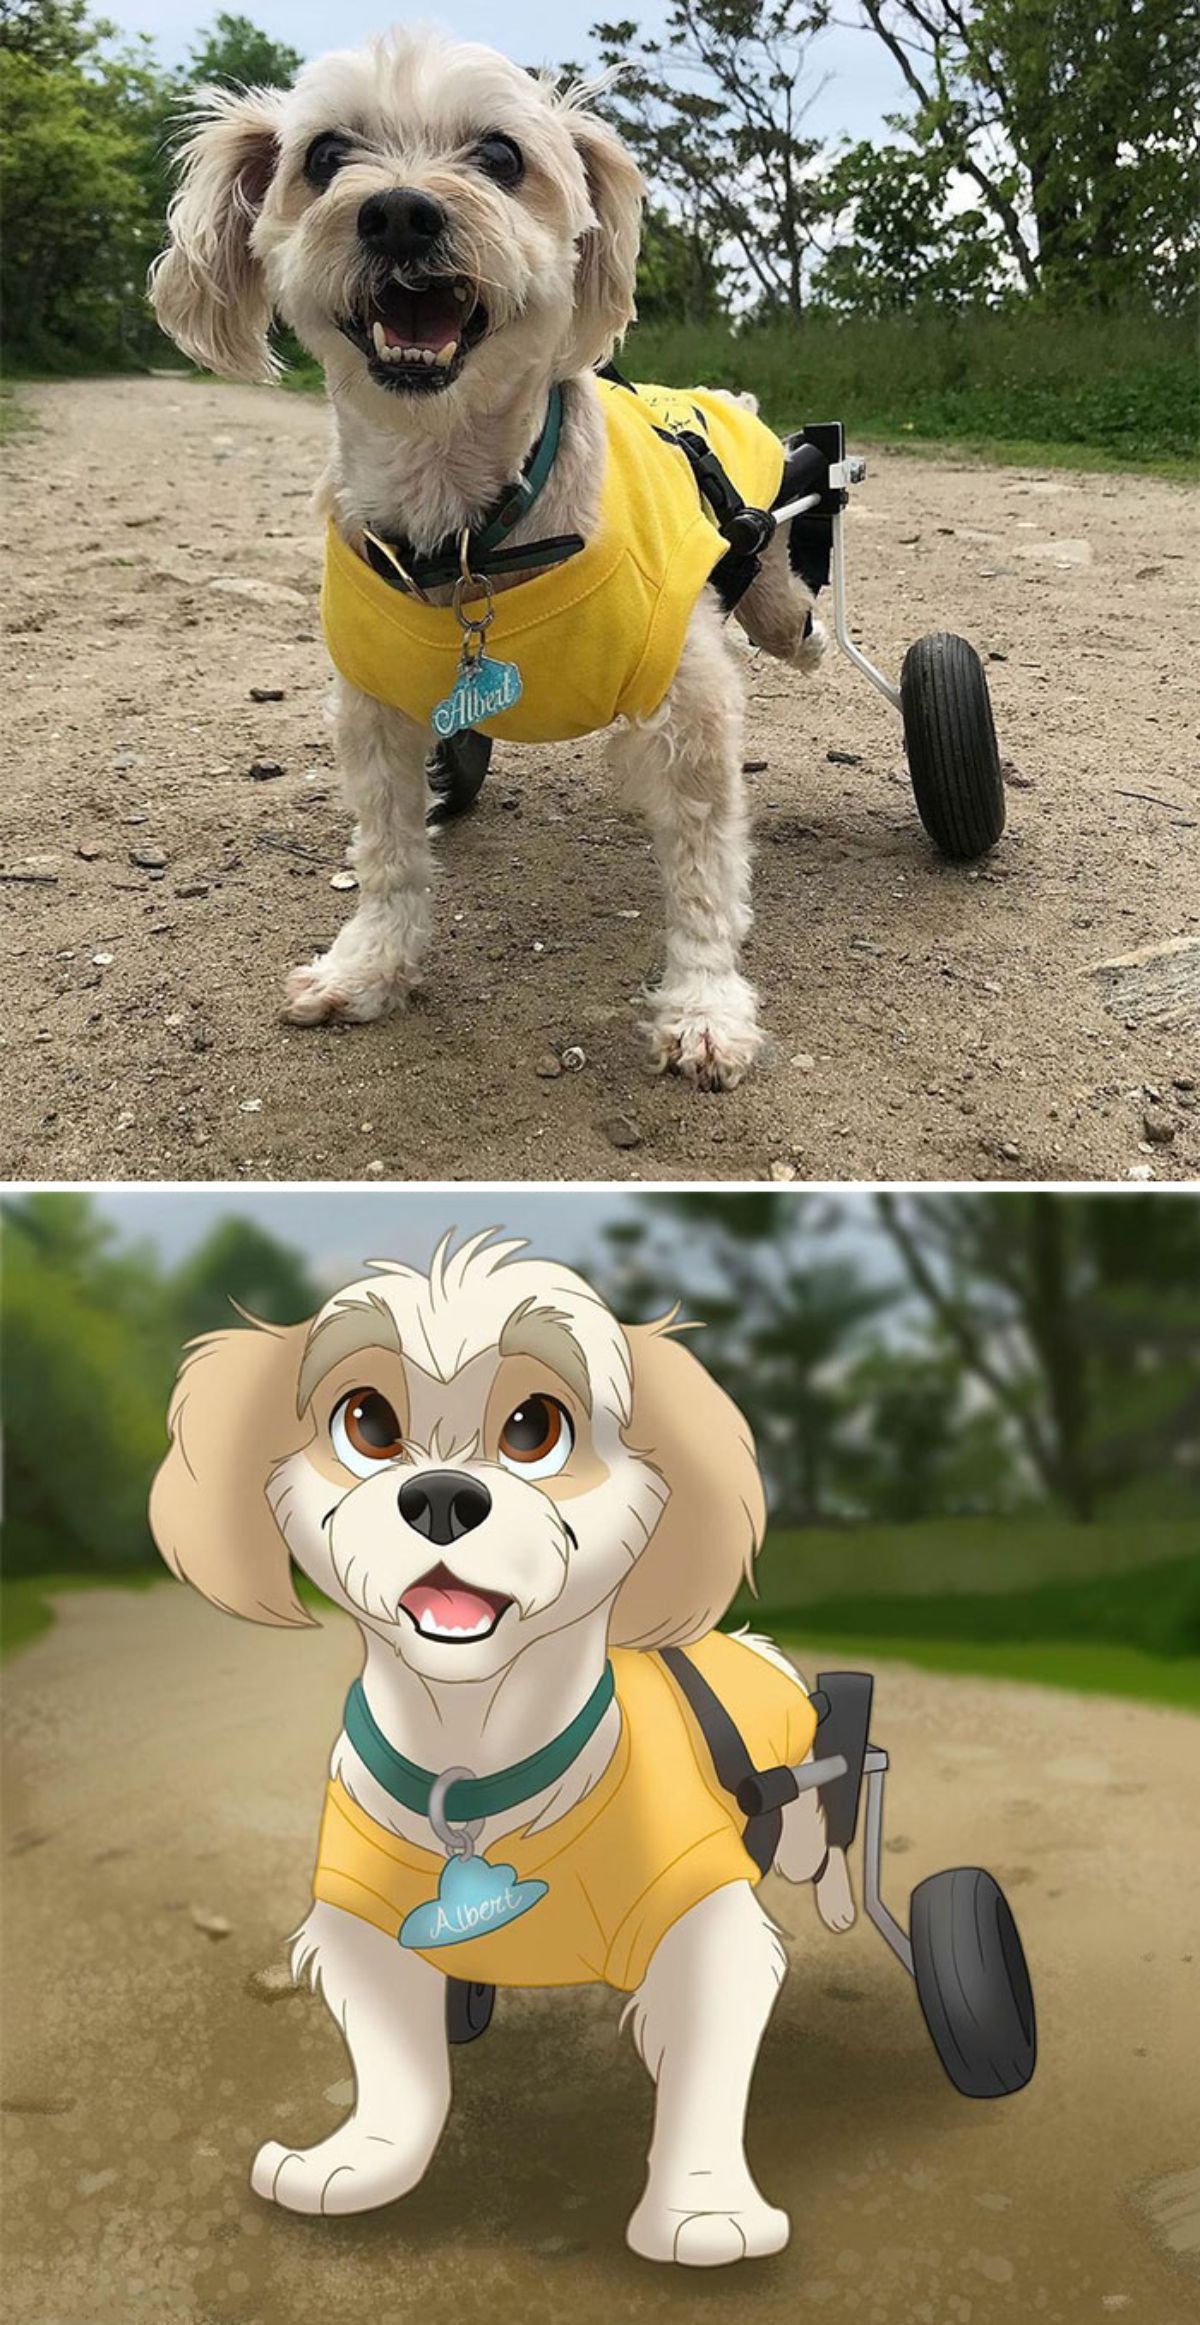 real photo and cartoon image of a white fluffy dog wearing a yellow shirt and with wheel legs